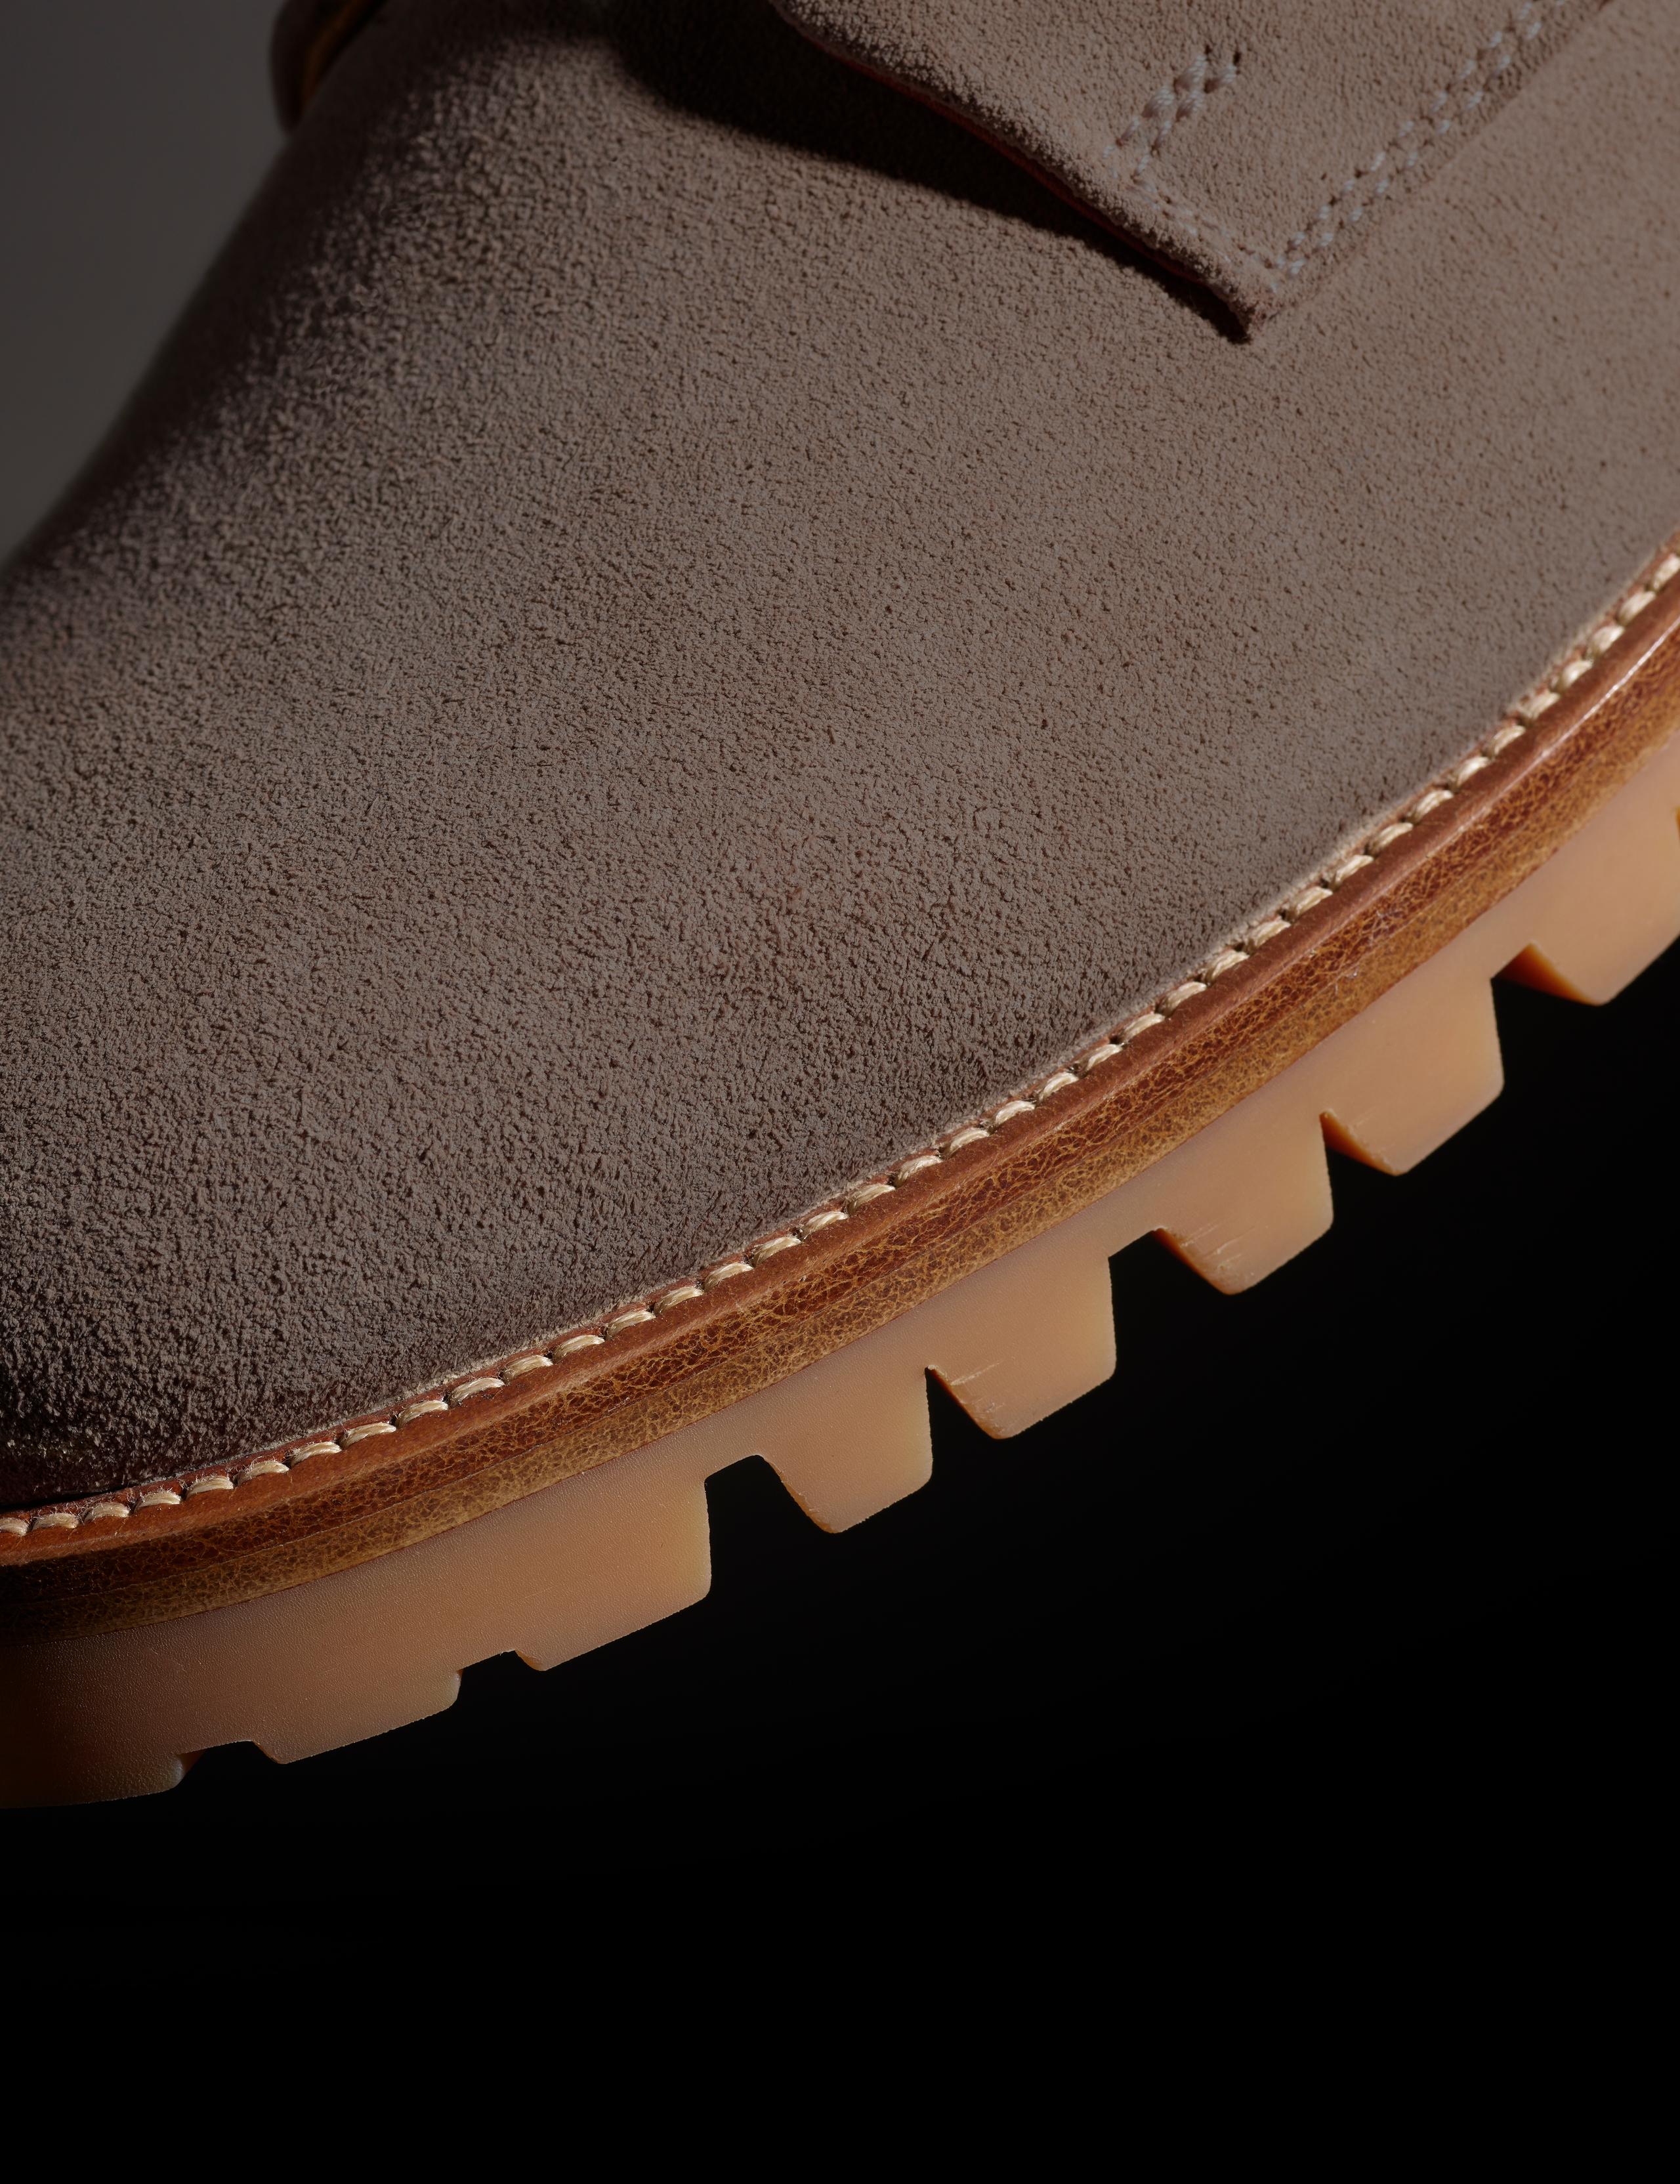 Detail view of Ojai Boot stacked leather heal and sole